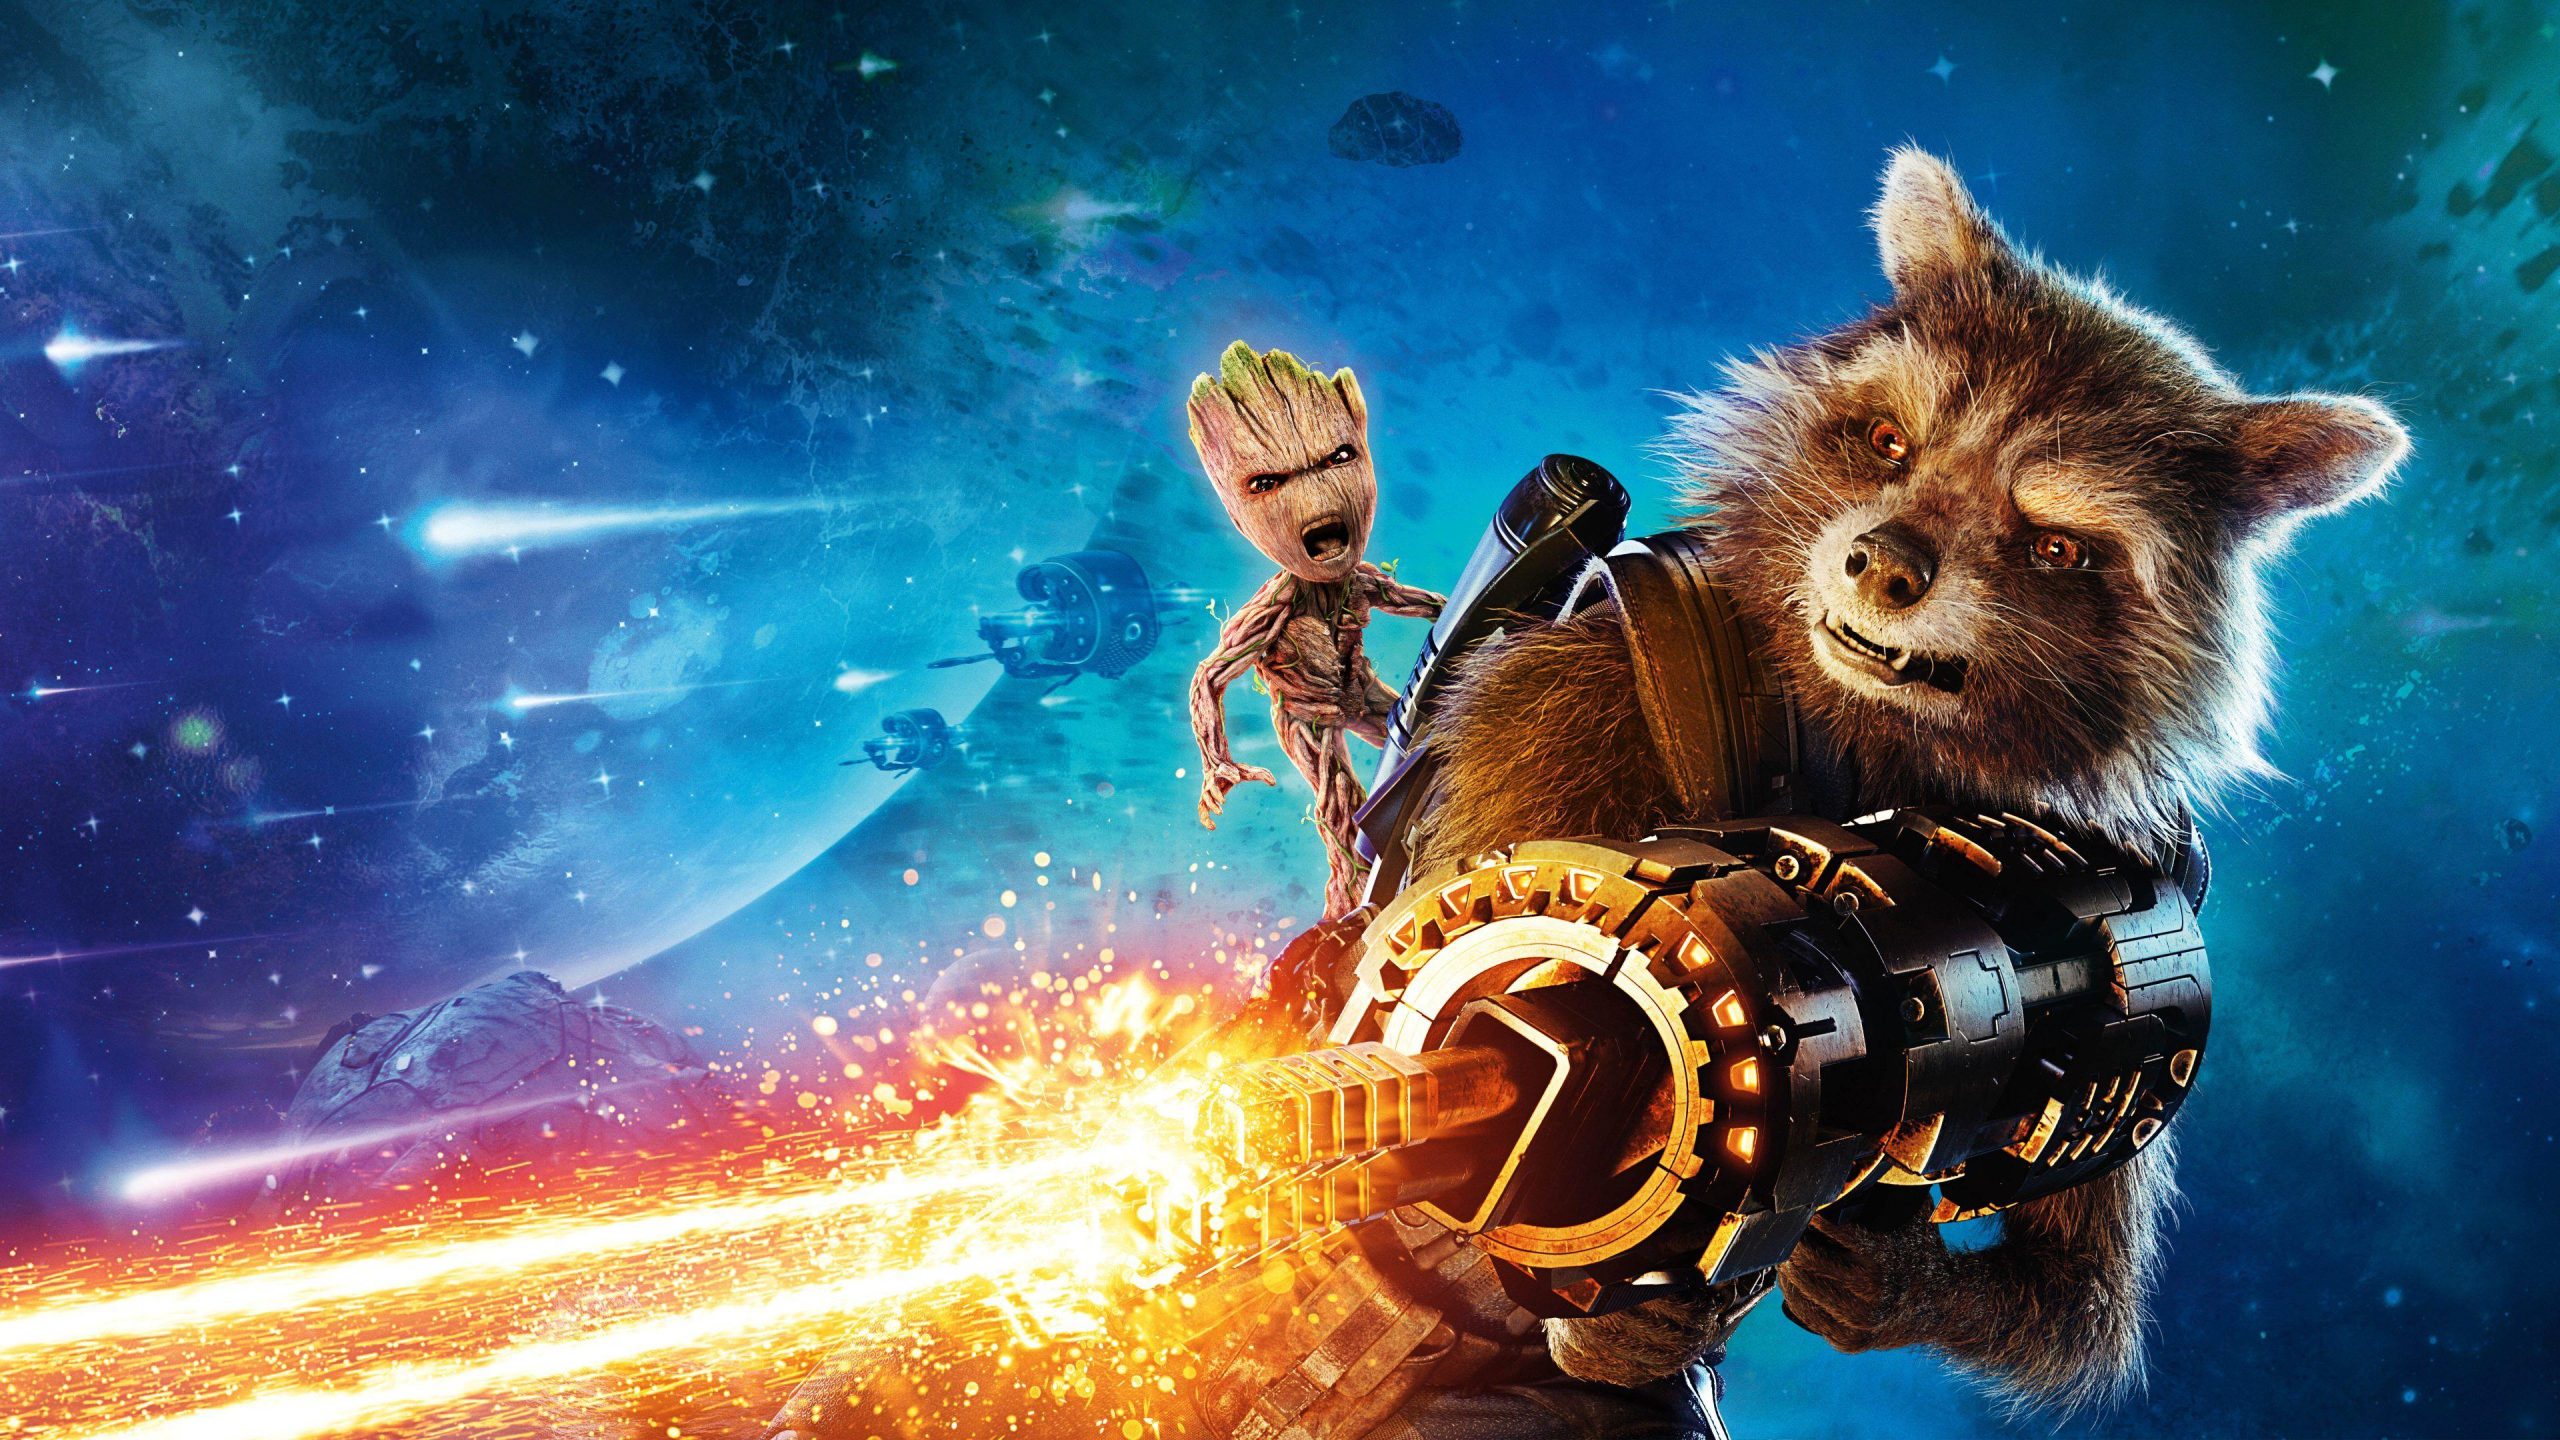 Guardians Of The Galaxy Spaceship Hd Wallpapers For Pc, Guardians Of The Galaxy Spaceship, Movies